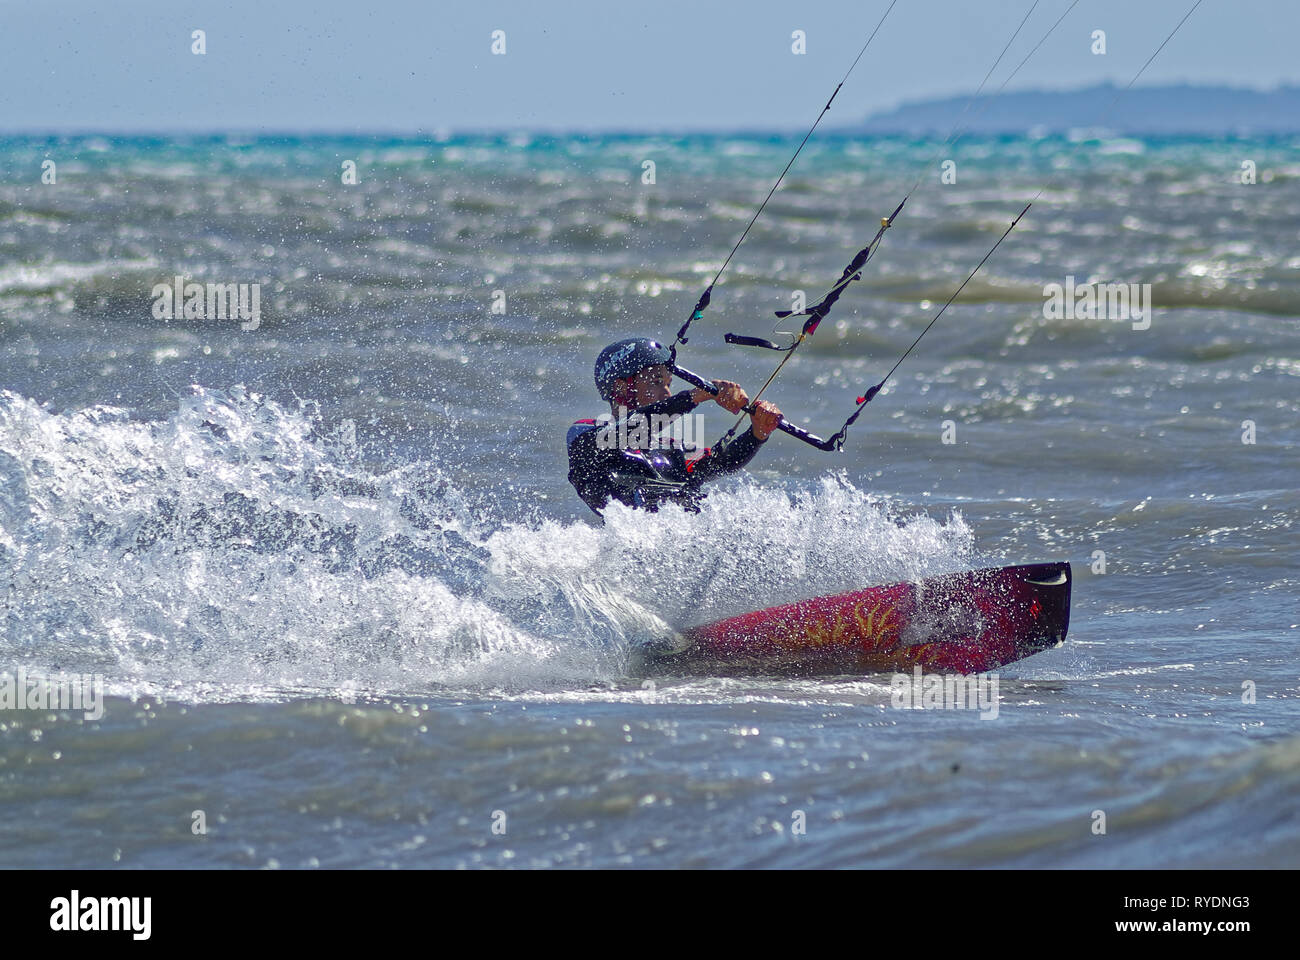 Kite boarder in the waves during a windy day in french riviera Stock Photo